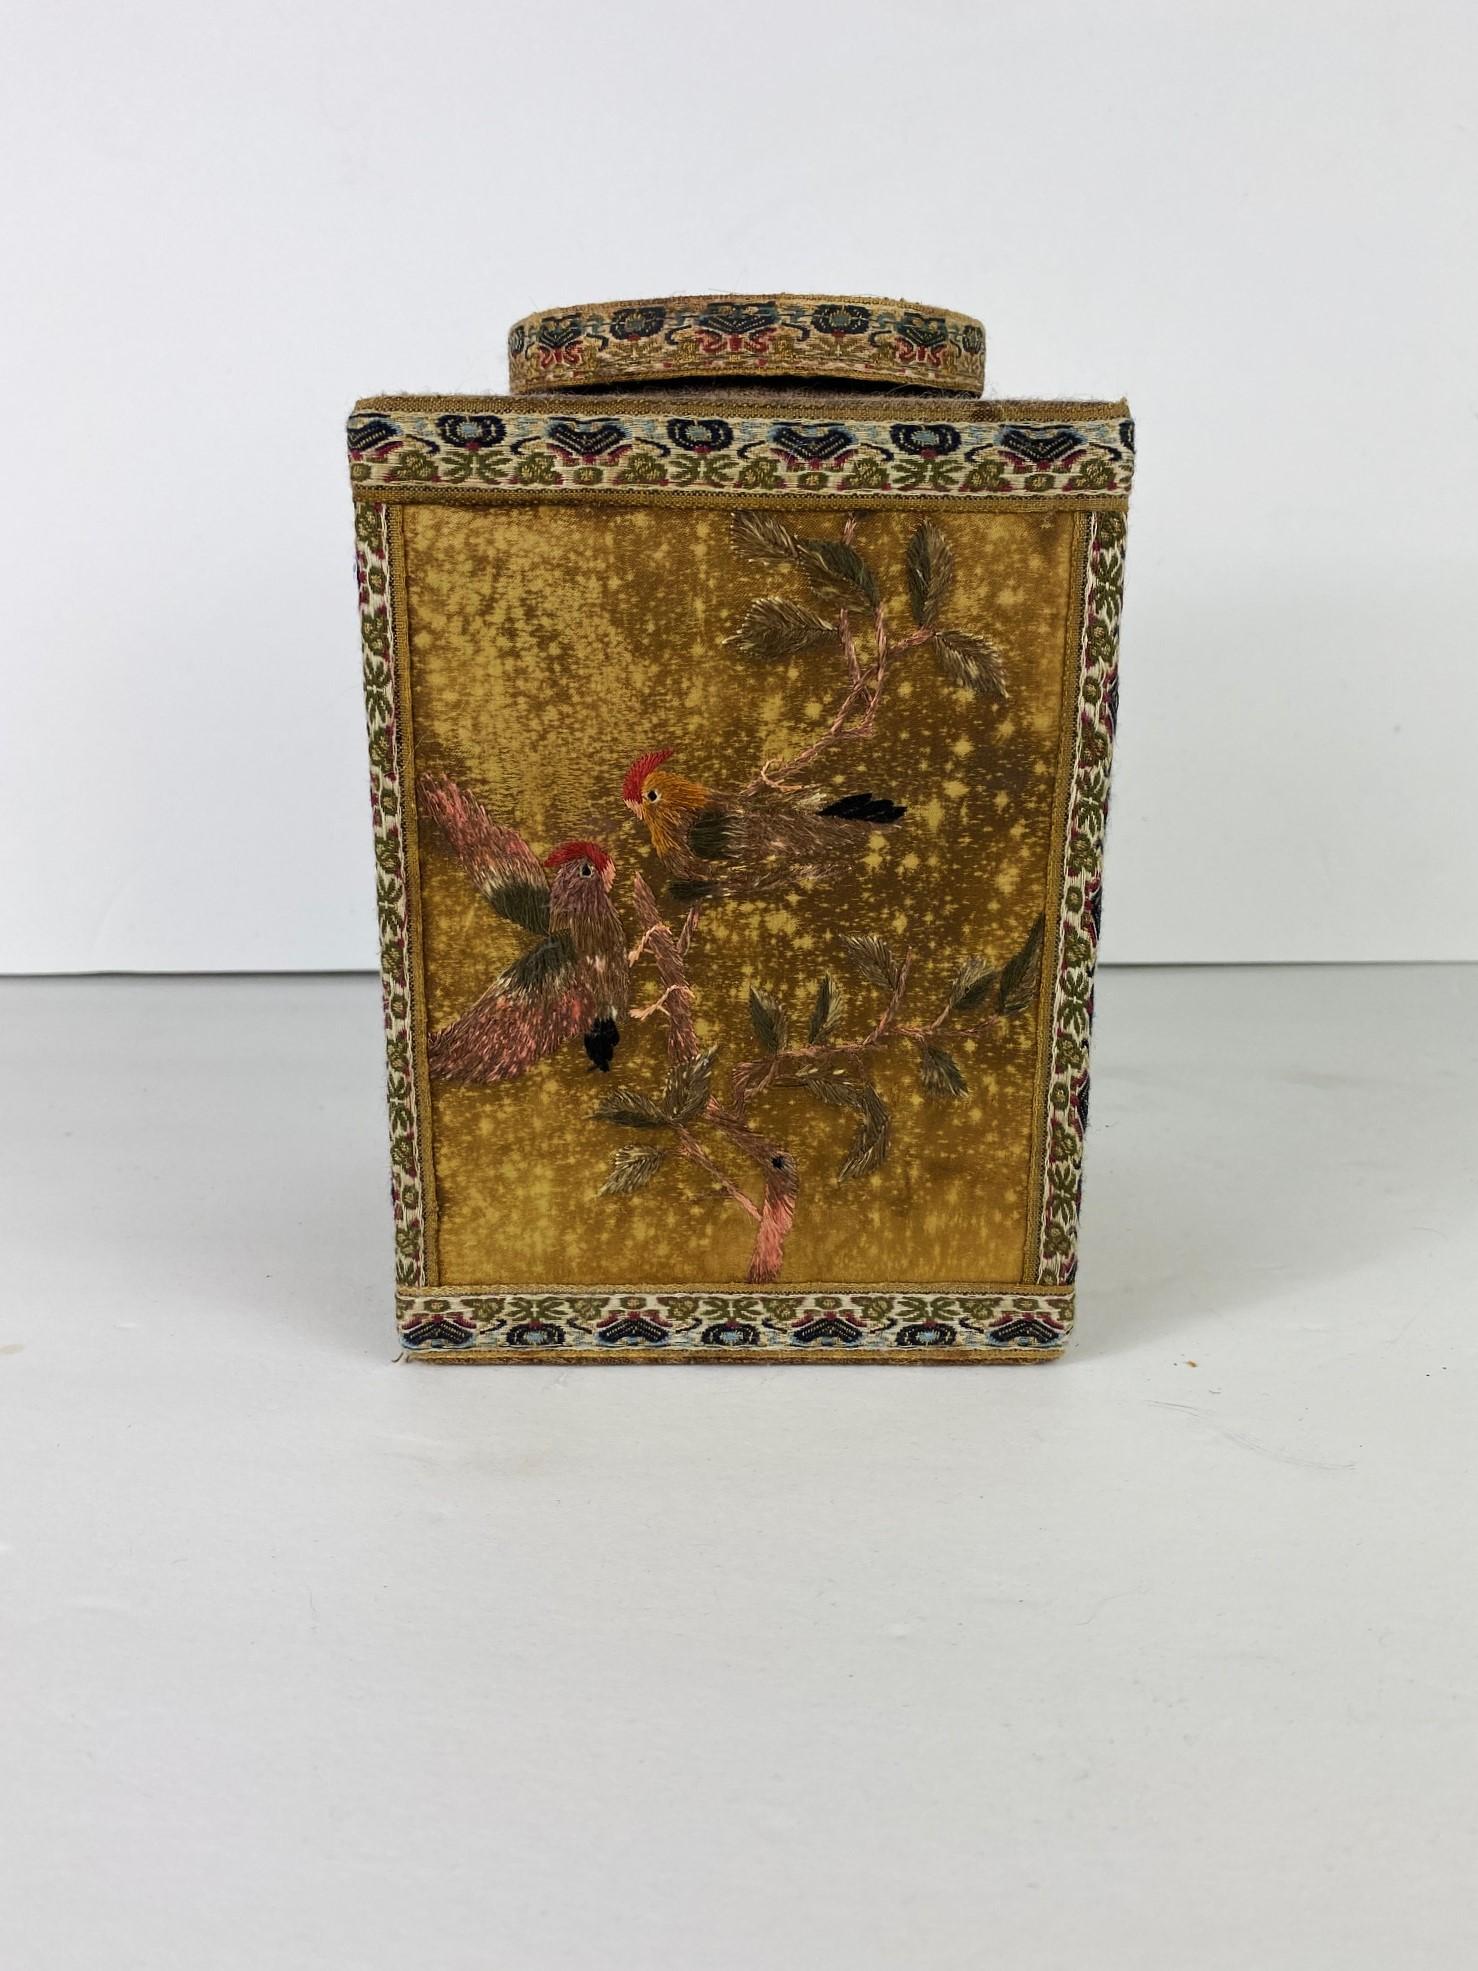 A handmade embroidery in birds and flowers Chinese tea caddy.